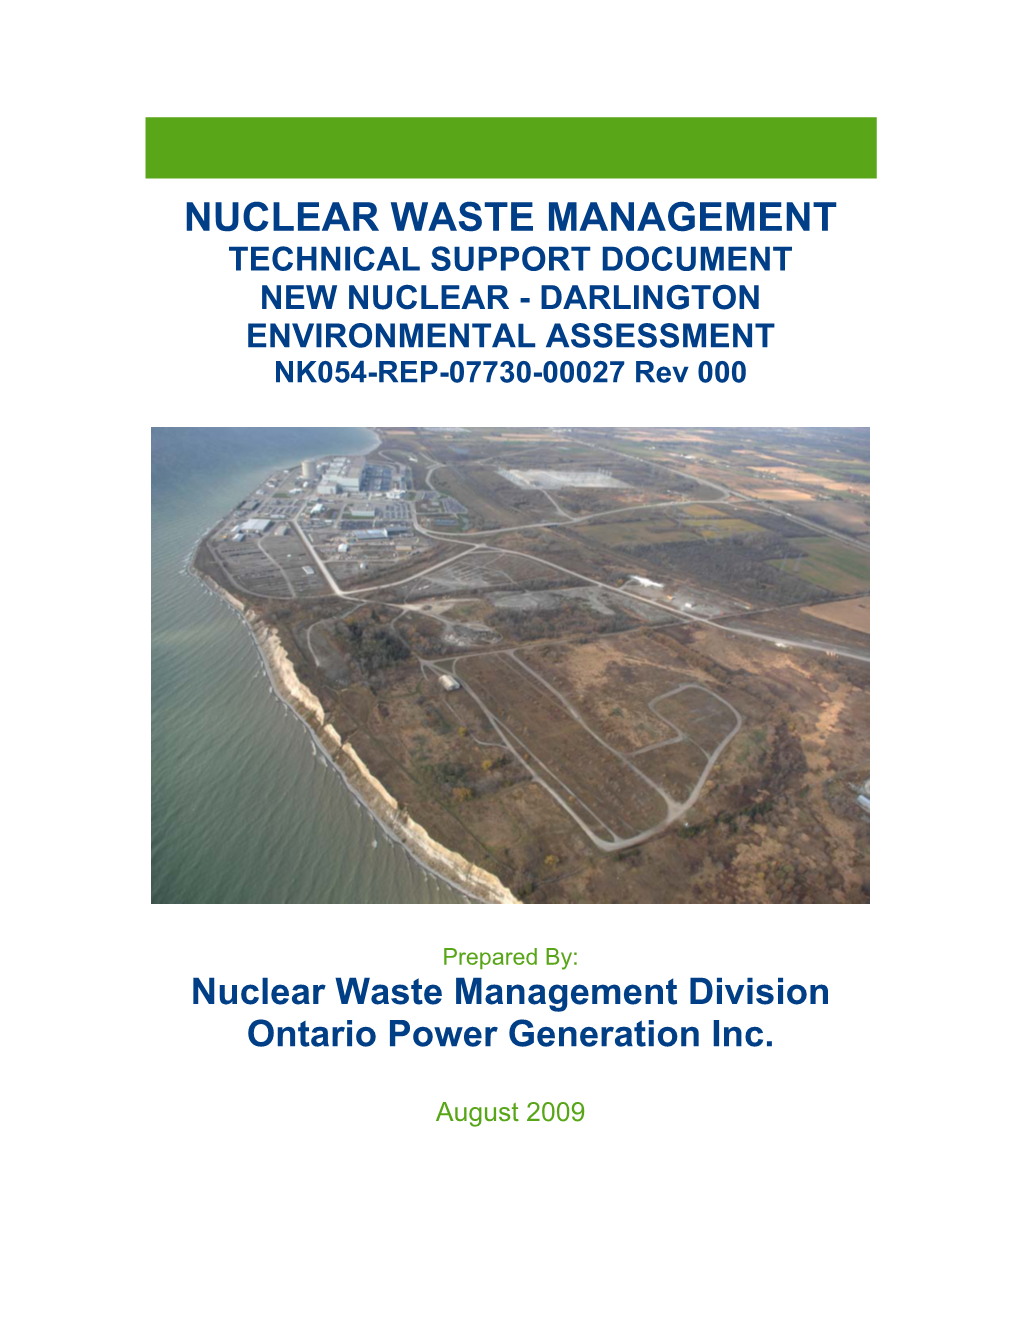 NUCLEAR WASTE MANAGEMENT TECHNICAL SUPPORT DOCUMENT NEW NUCLEAR - DARLINGTON ENVIRONMENTAL ASSESSMENT NK054-REP-07730-00027 Rev 000